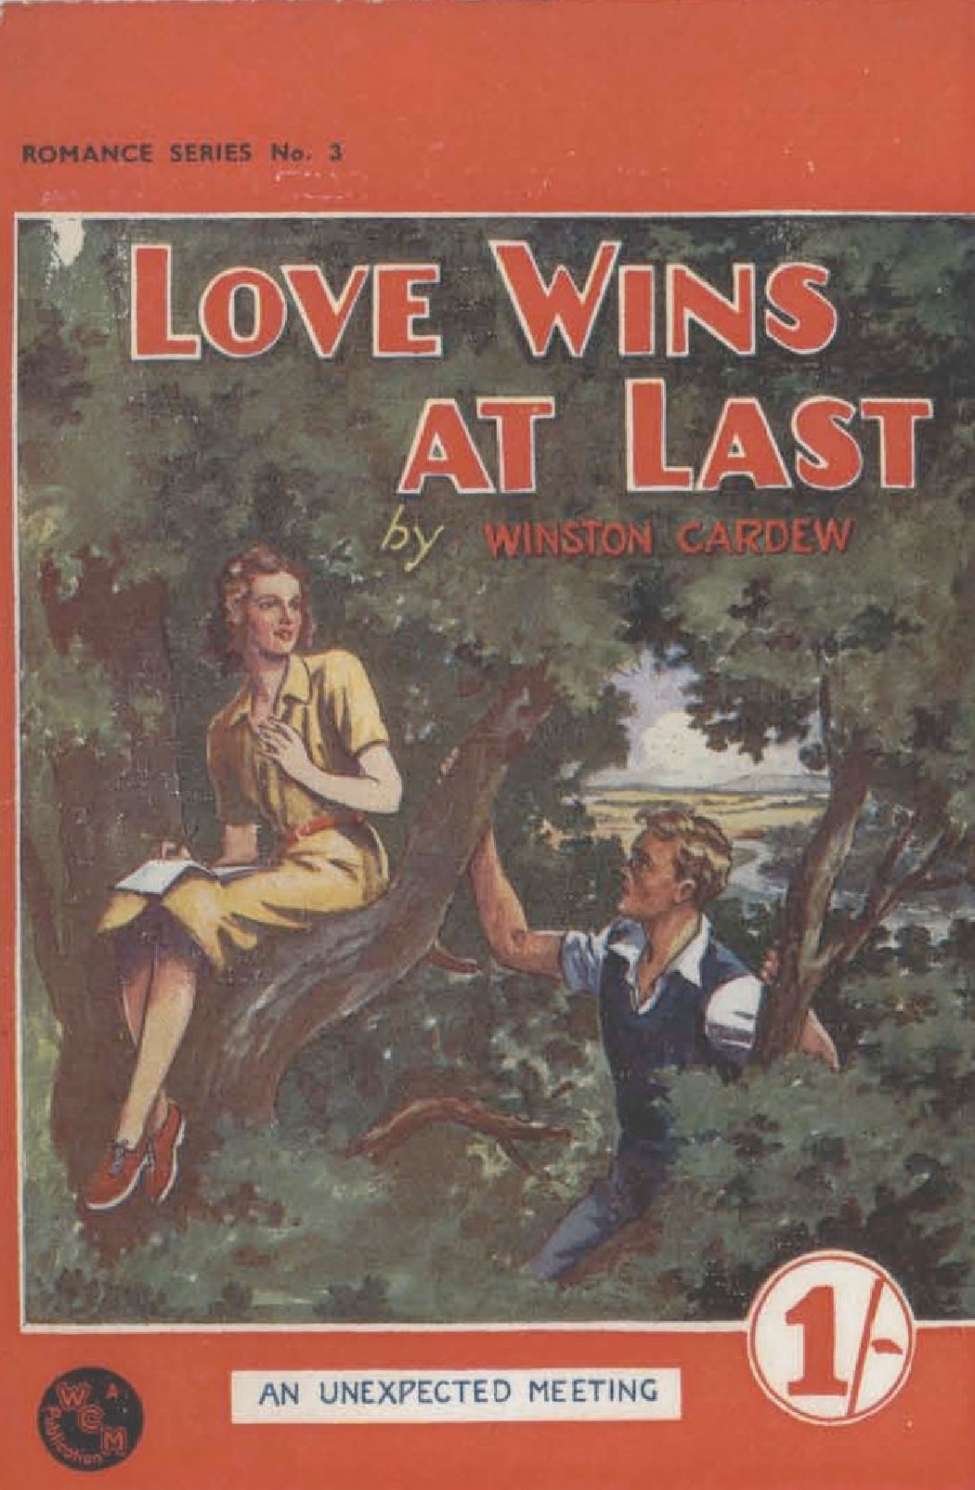 Comic Book Cover For Romance Series 3 Love Wins At Last